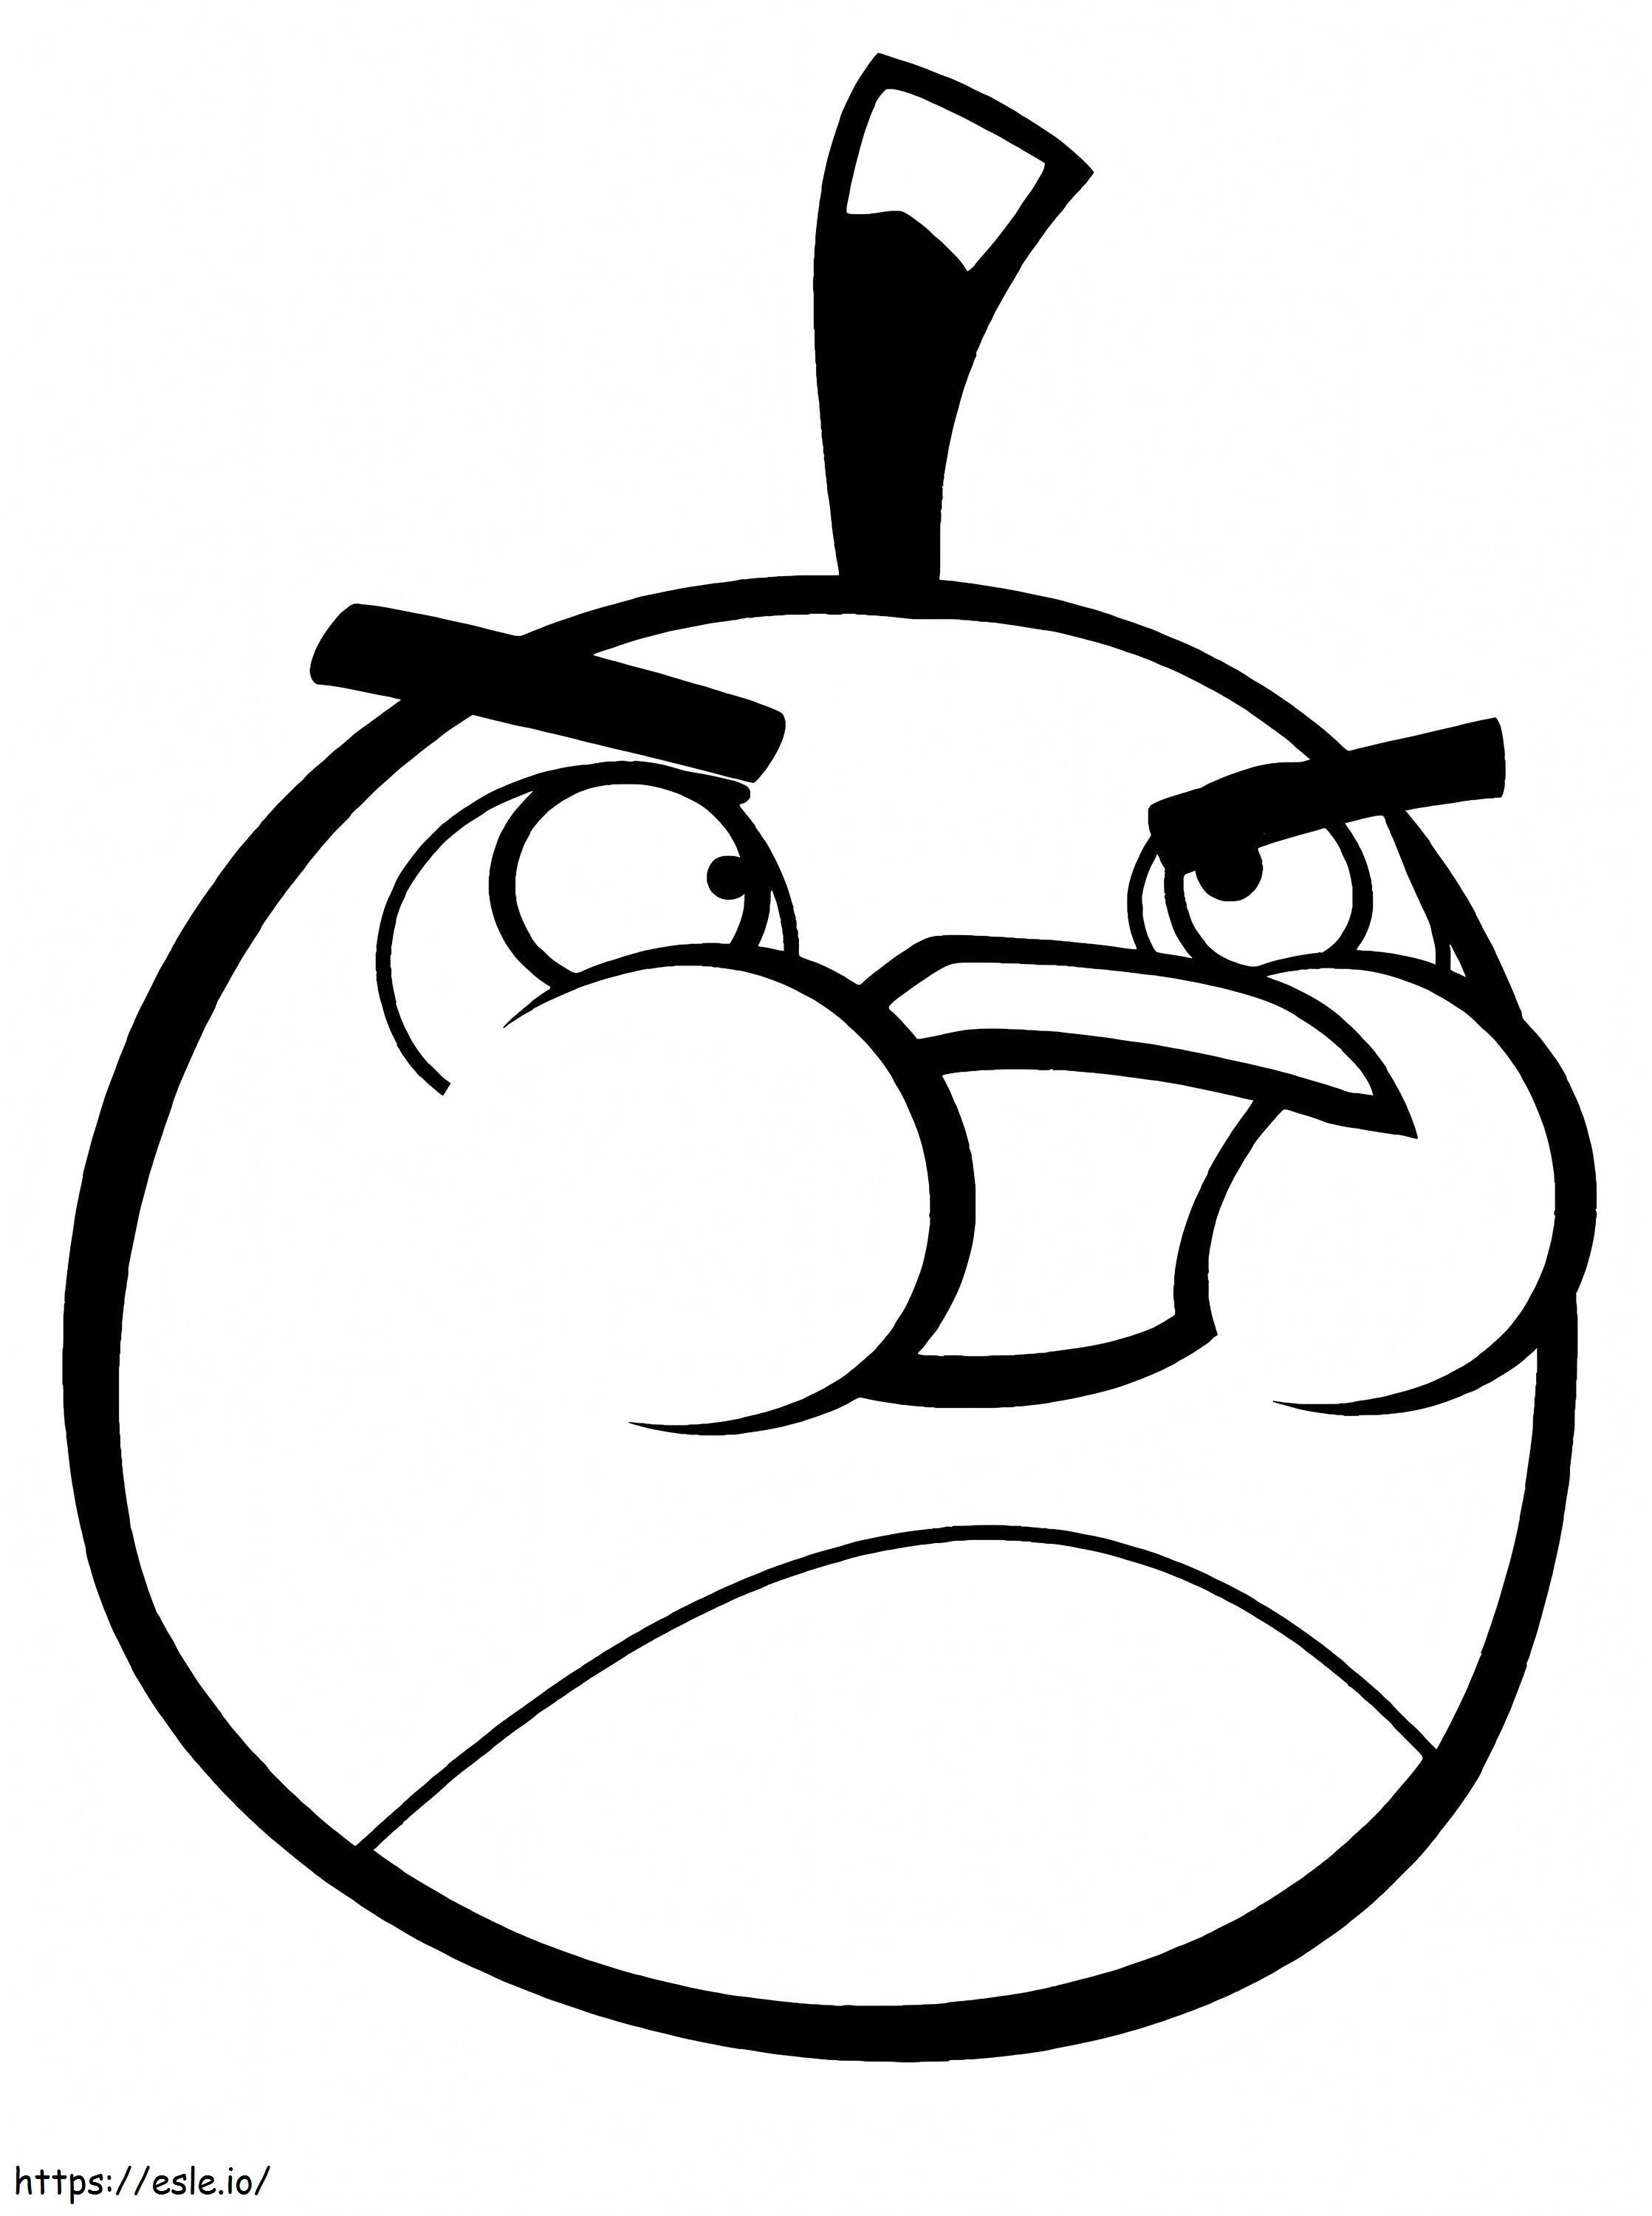 1554109371 Game Coloring Angry Bird Save Bomb Der schwarze Vogel von Game Coloring Angry Bird ausmalbilder